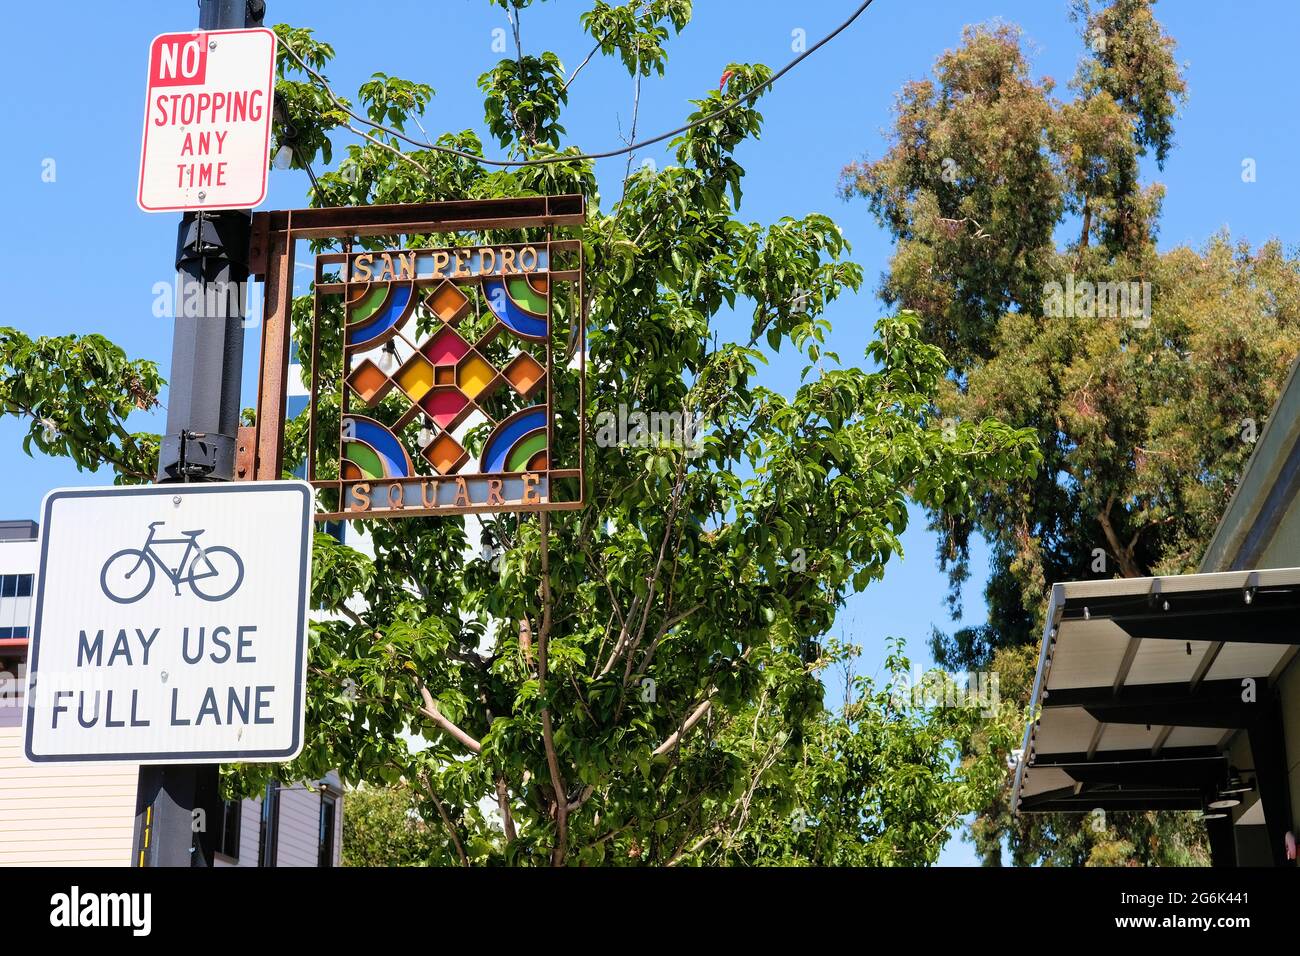 Stained glass street sign for San Pedro Square in downtown San Jose, California; a popular dining and entertainment destination in Silicon Valley. Stock Photo